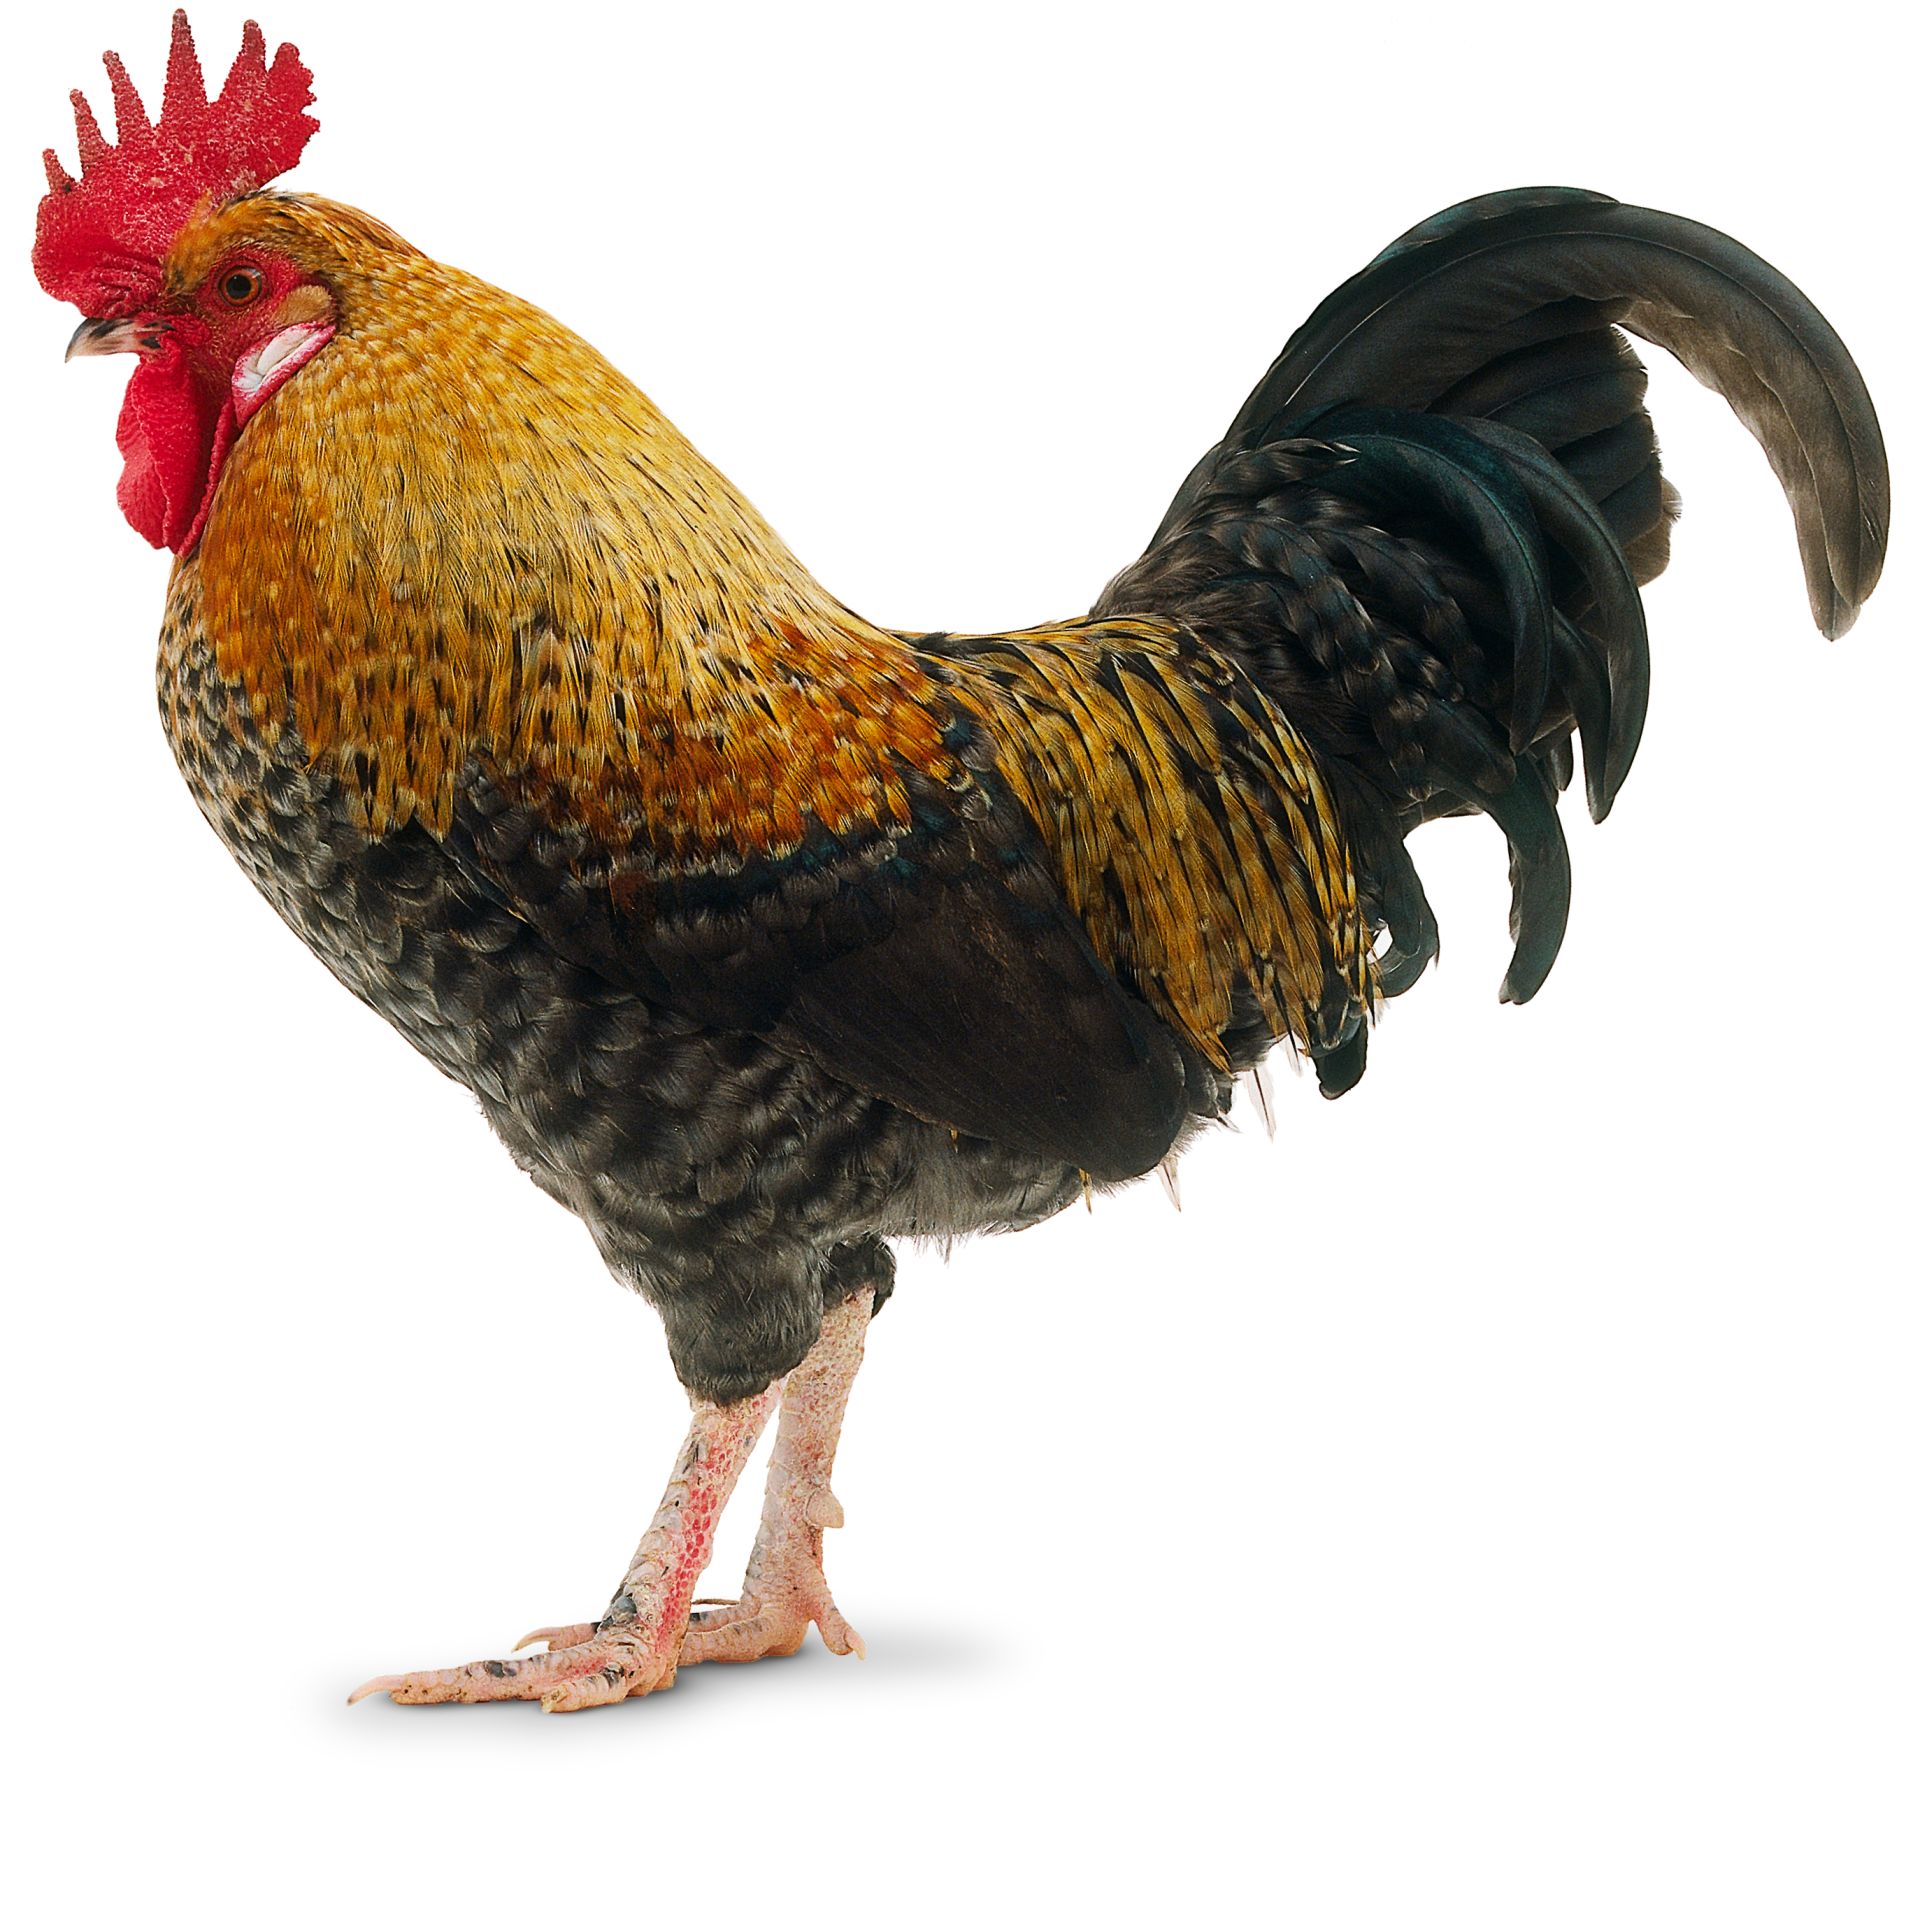 What Is A Cockerel? | Rooster Facts | DK Find Out